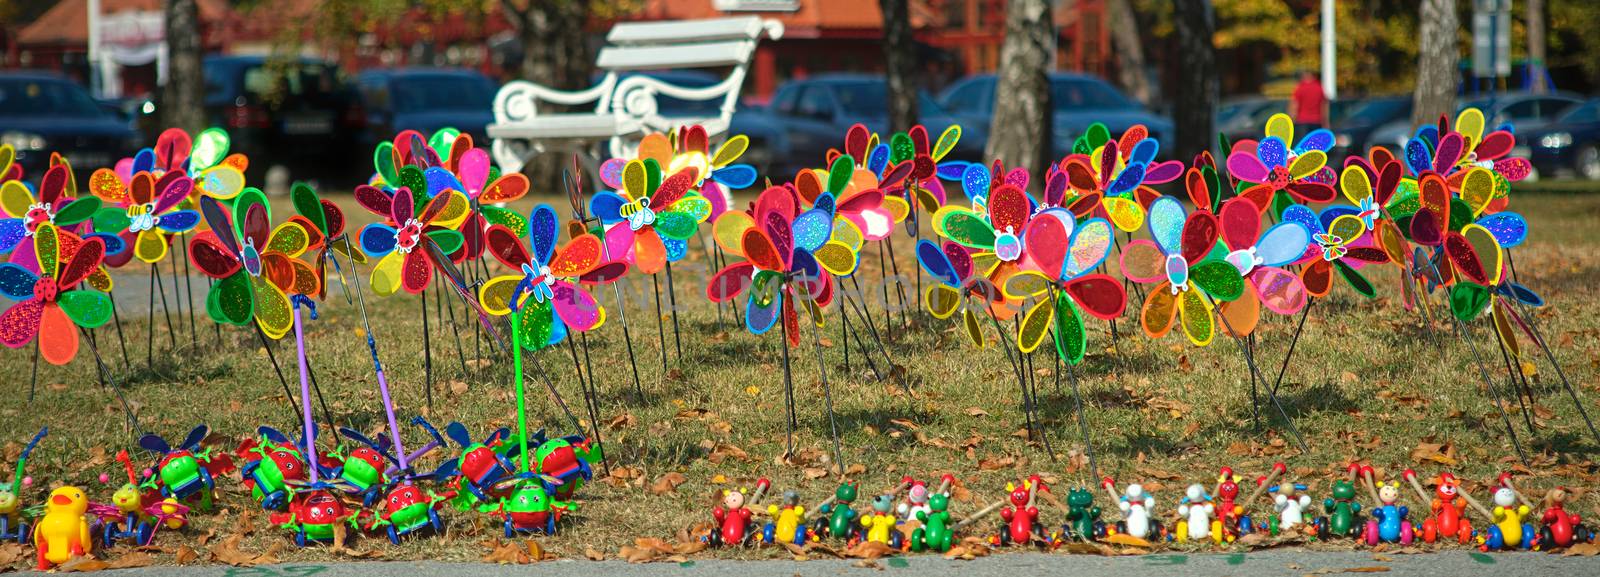 Bunch of colorful children windmill toys on a field by sheriffkule